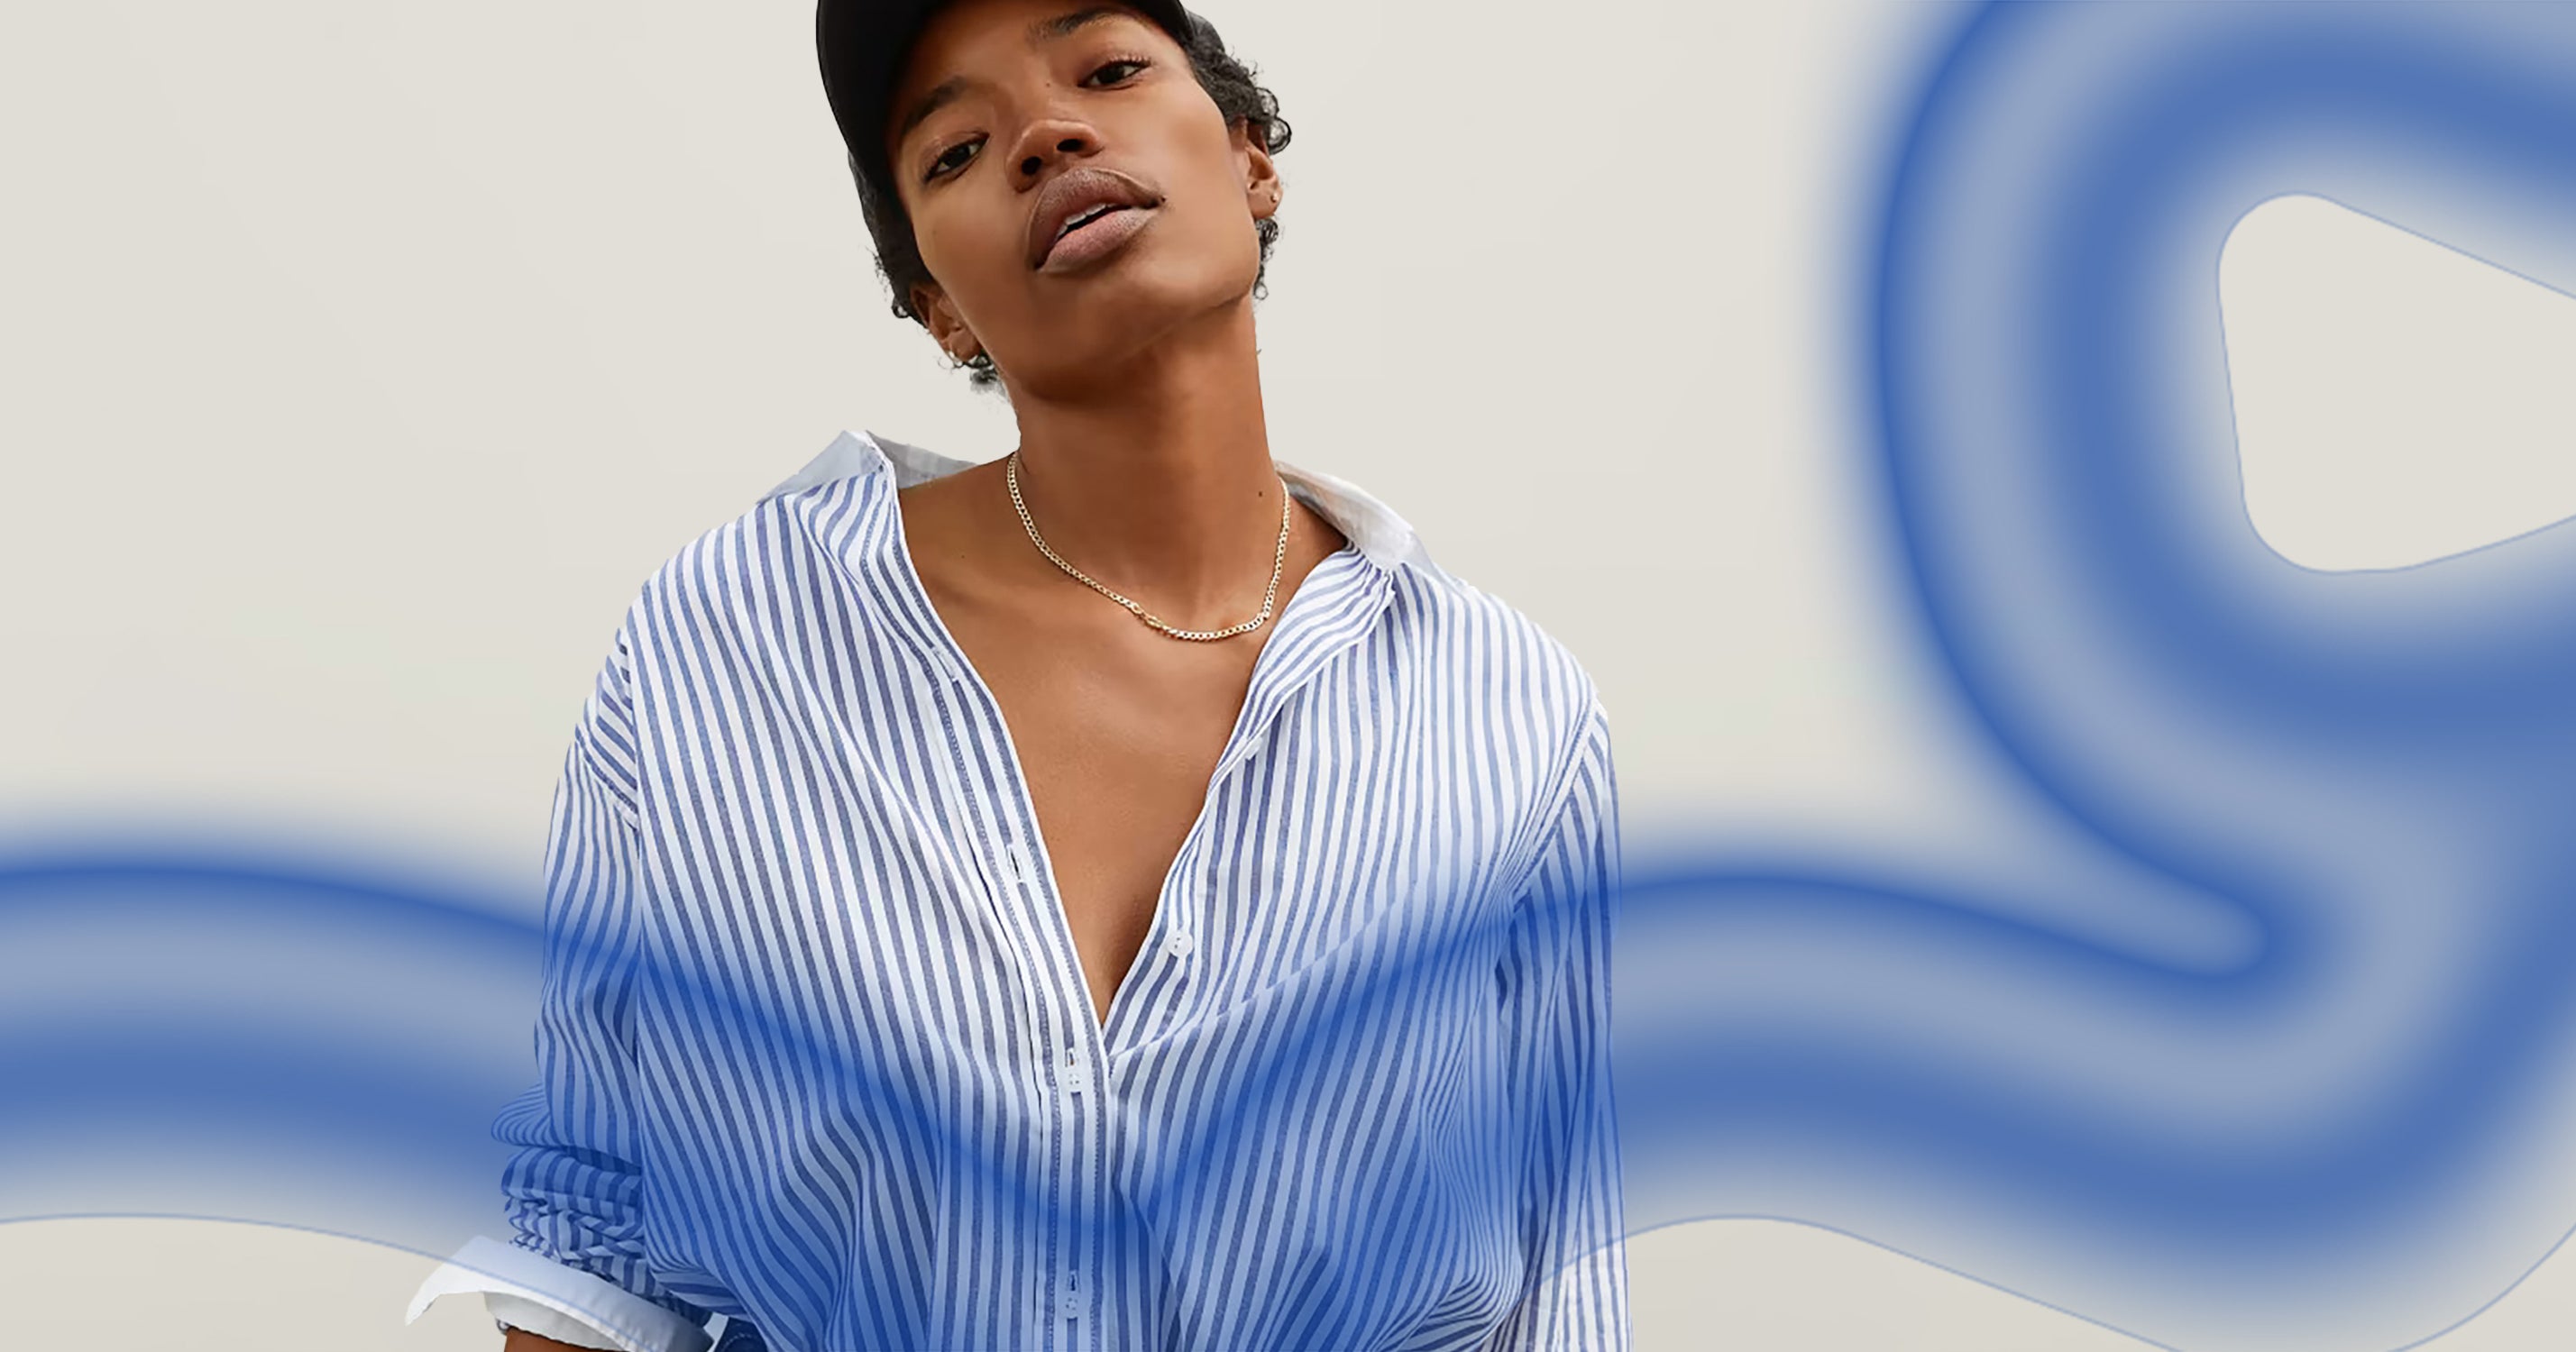 9 Striped Button-Up Shirts That Make The Chicest Summer Staple | Flipboard